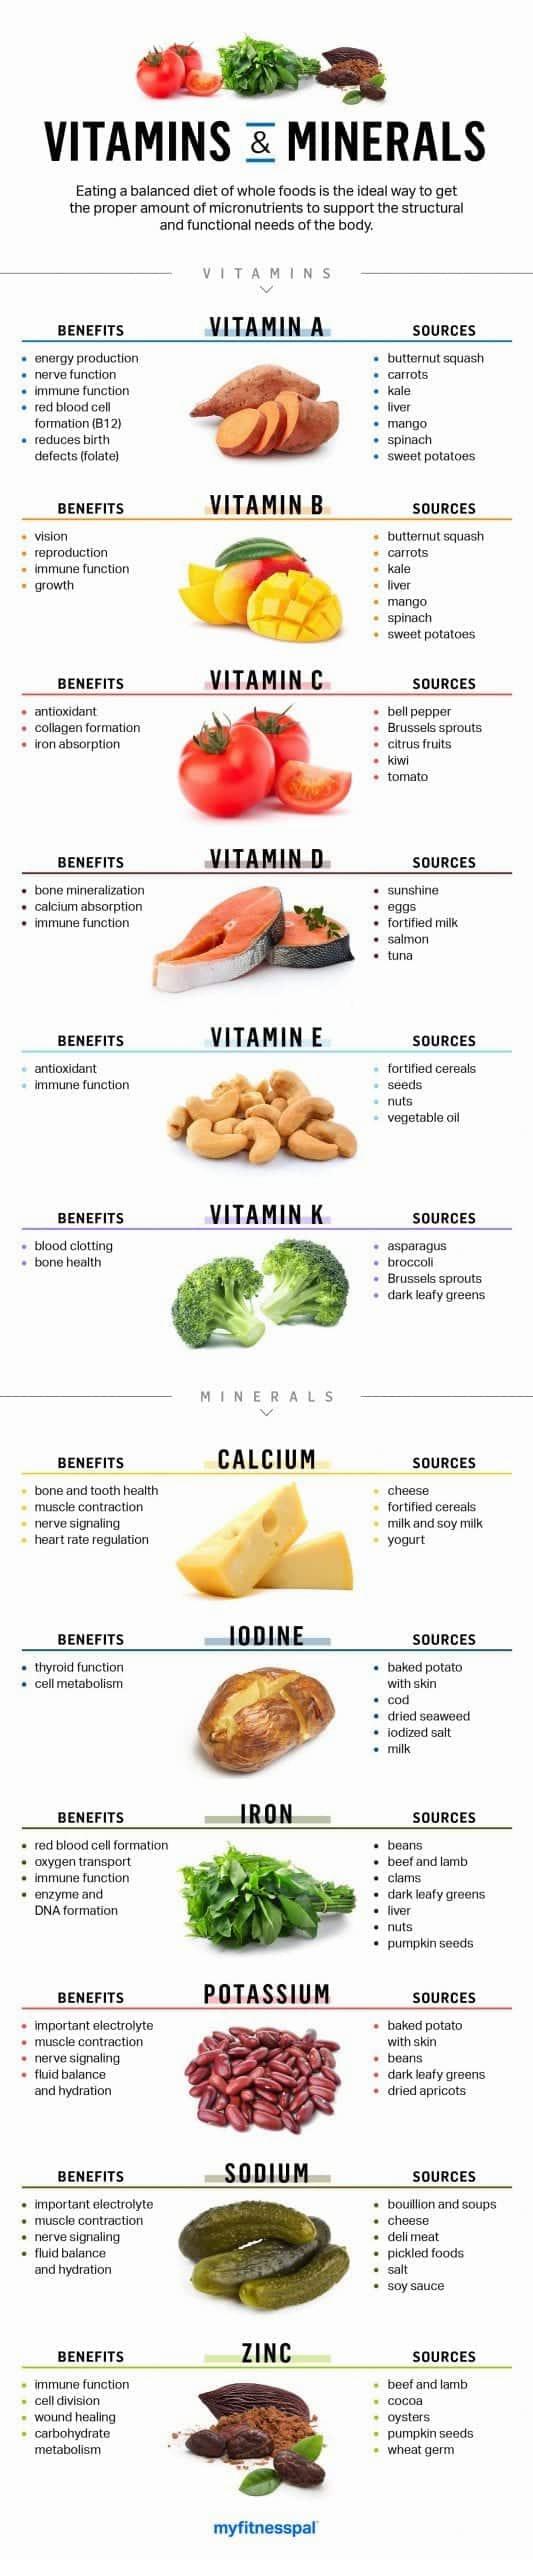 A table listing the benefits and food sources of various vitamins and minerals.